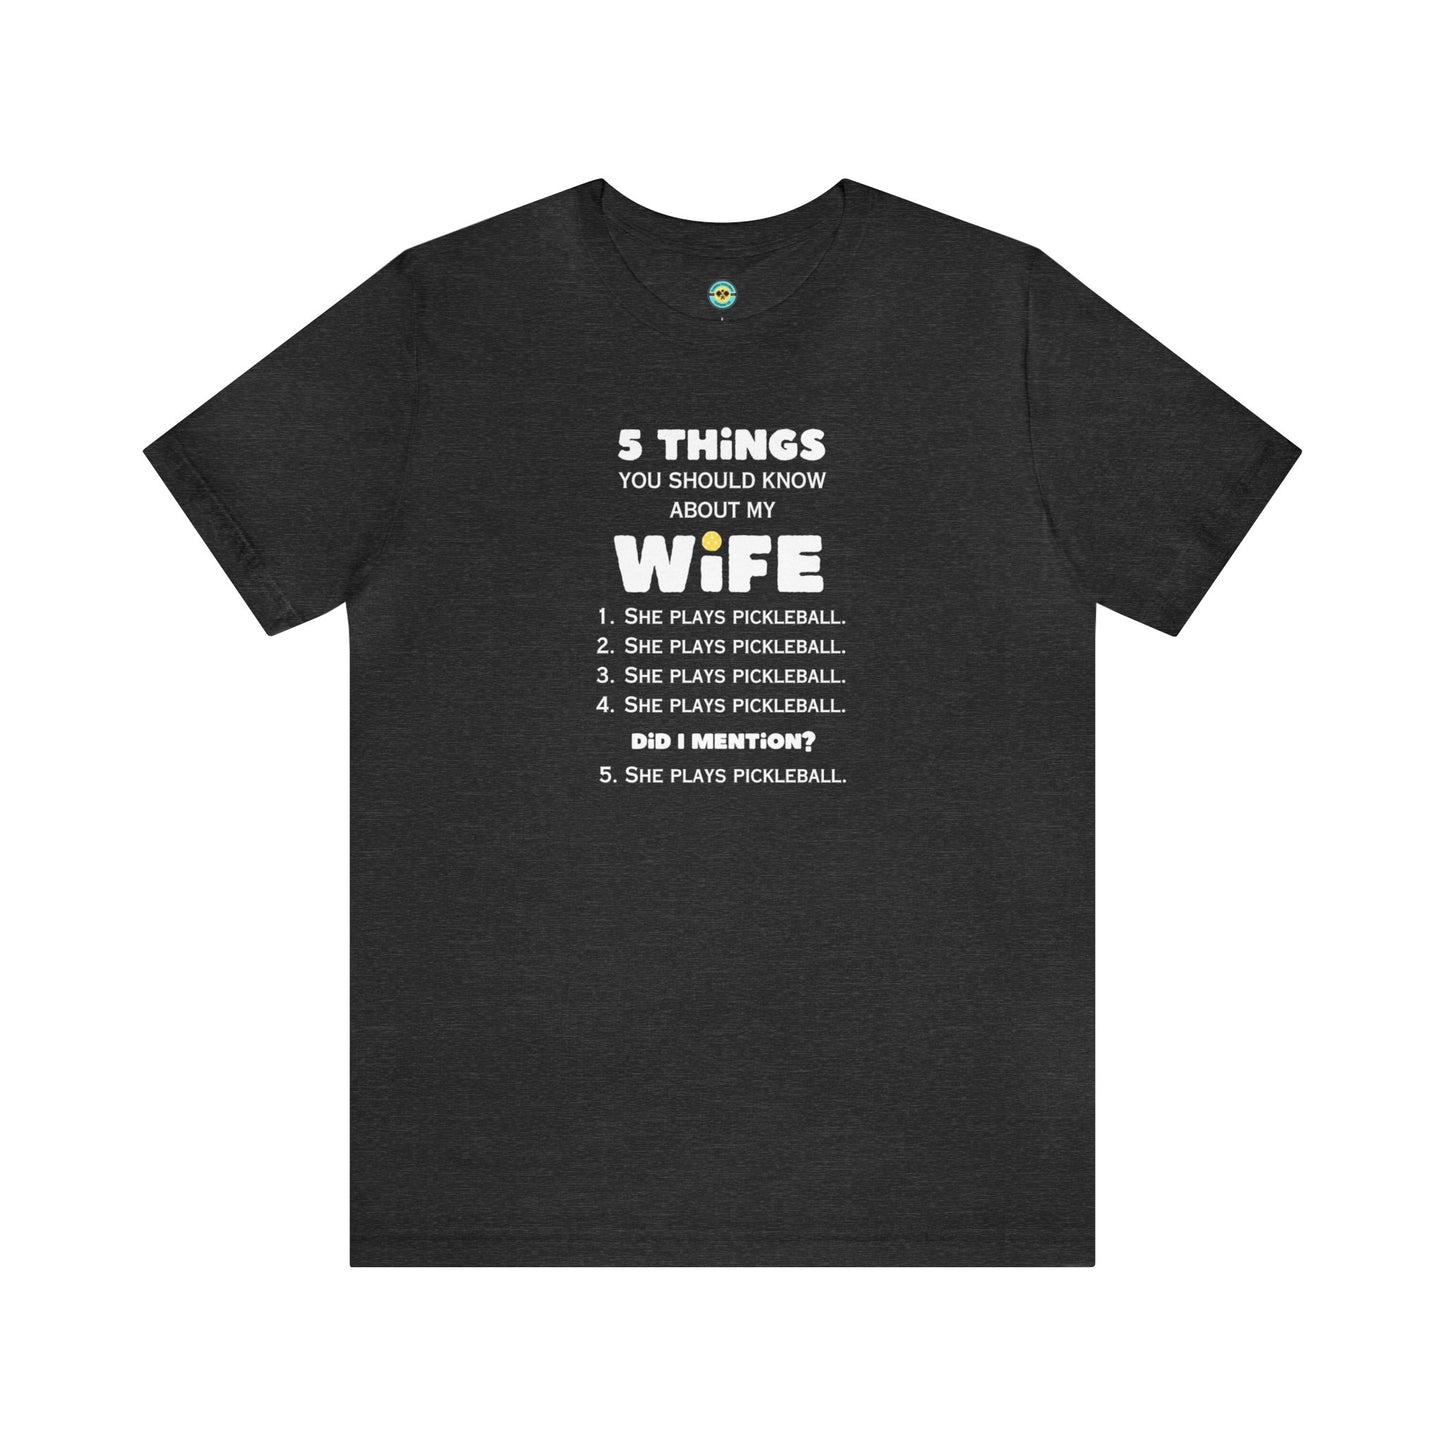 5 Things You Should Know About My Wife Unisex Tee